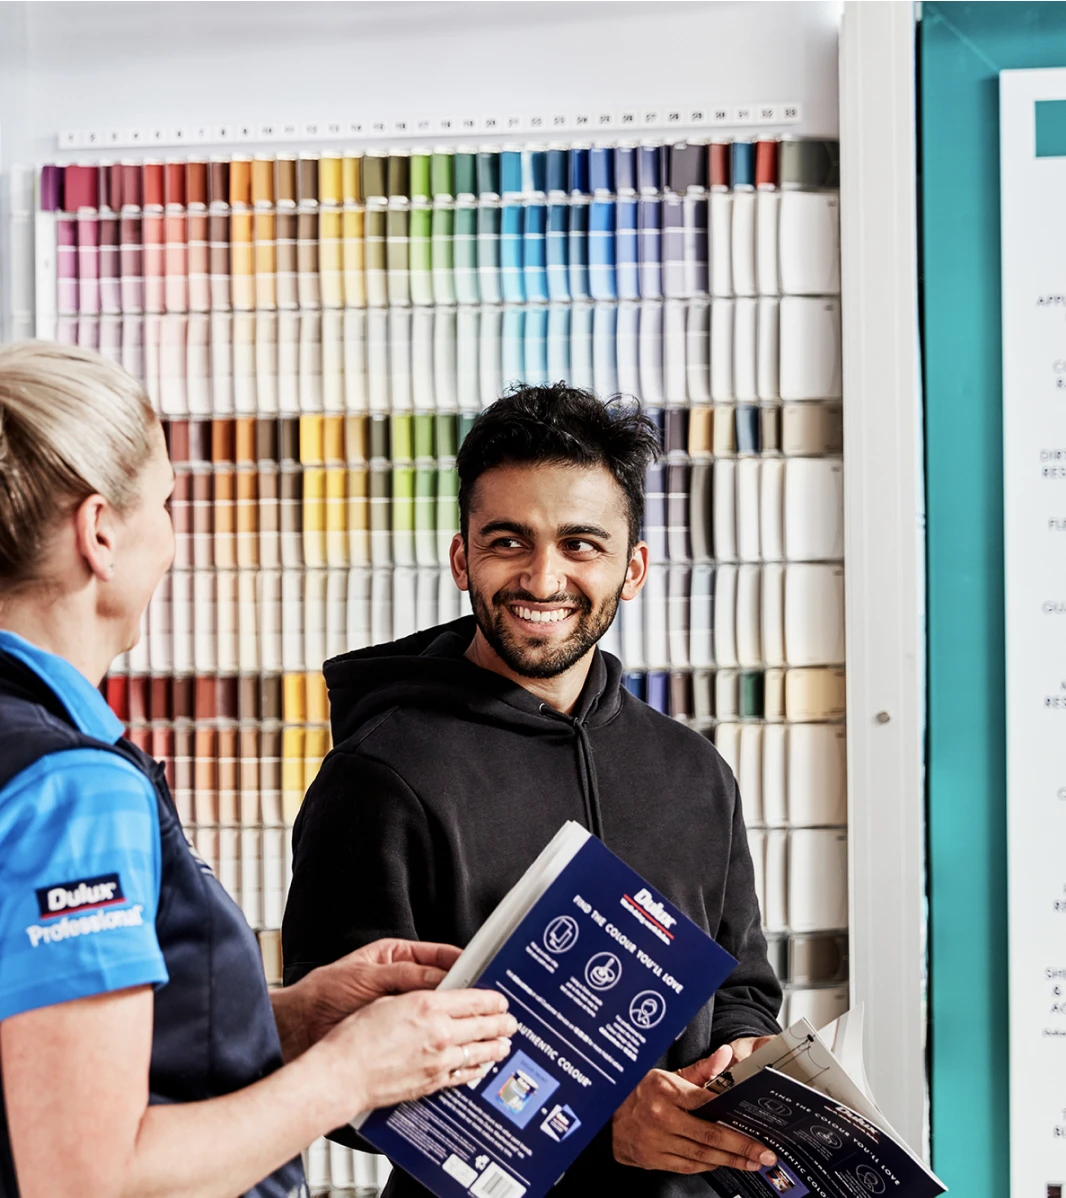 Dulux paint support crew member assisting a customer with their inquiry in front of colour board